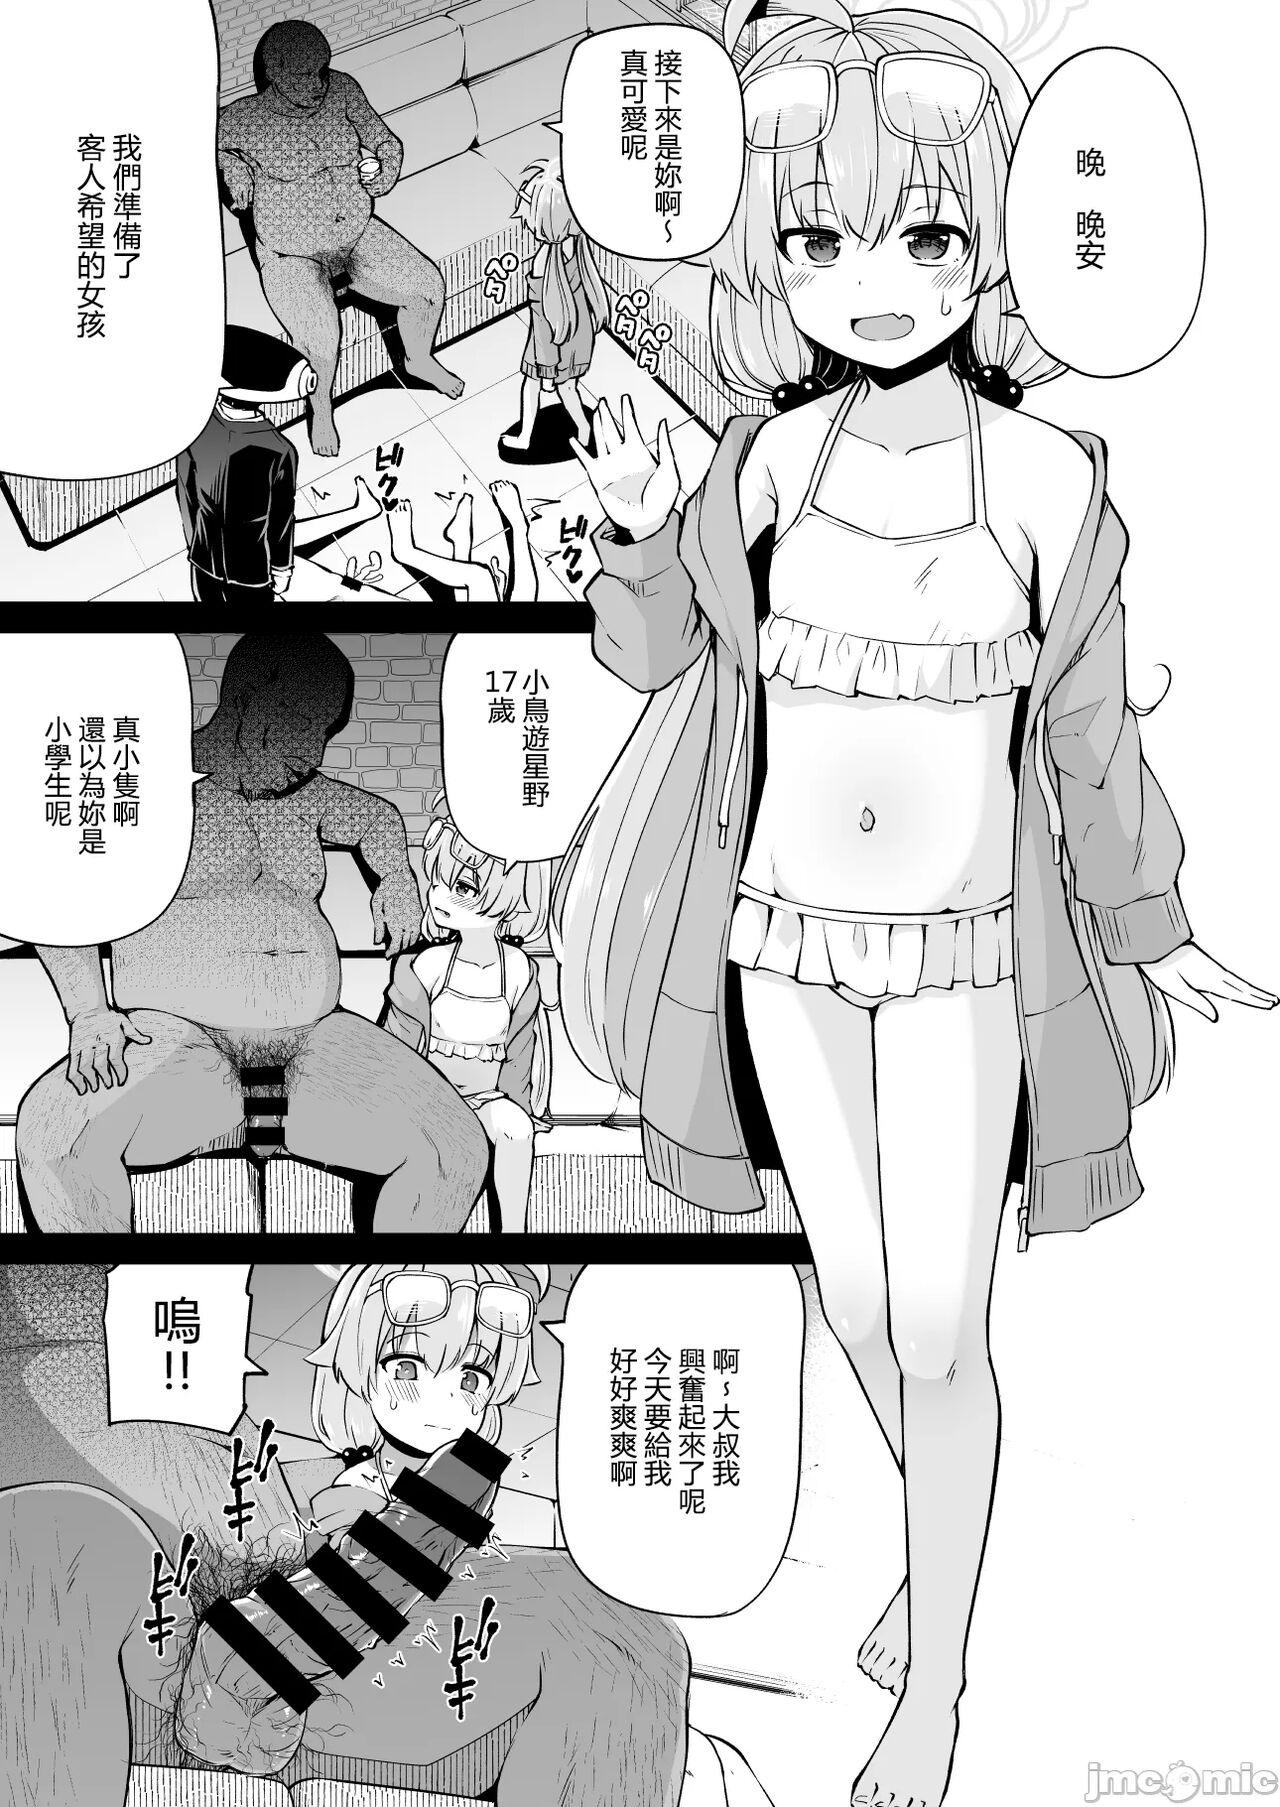 Chudai アビドス借金対策委員会 - Blue archive Toilet - Page 7